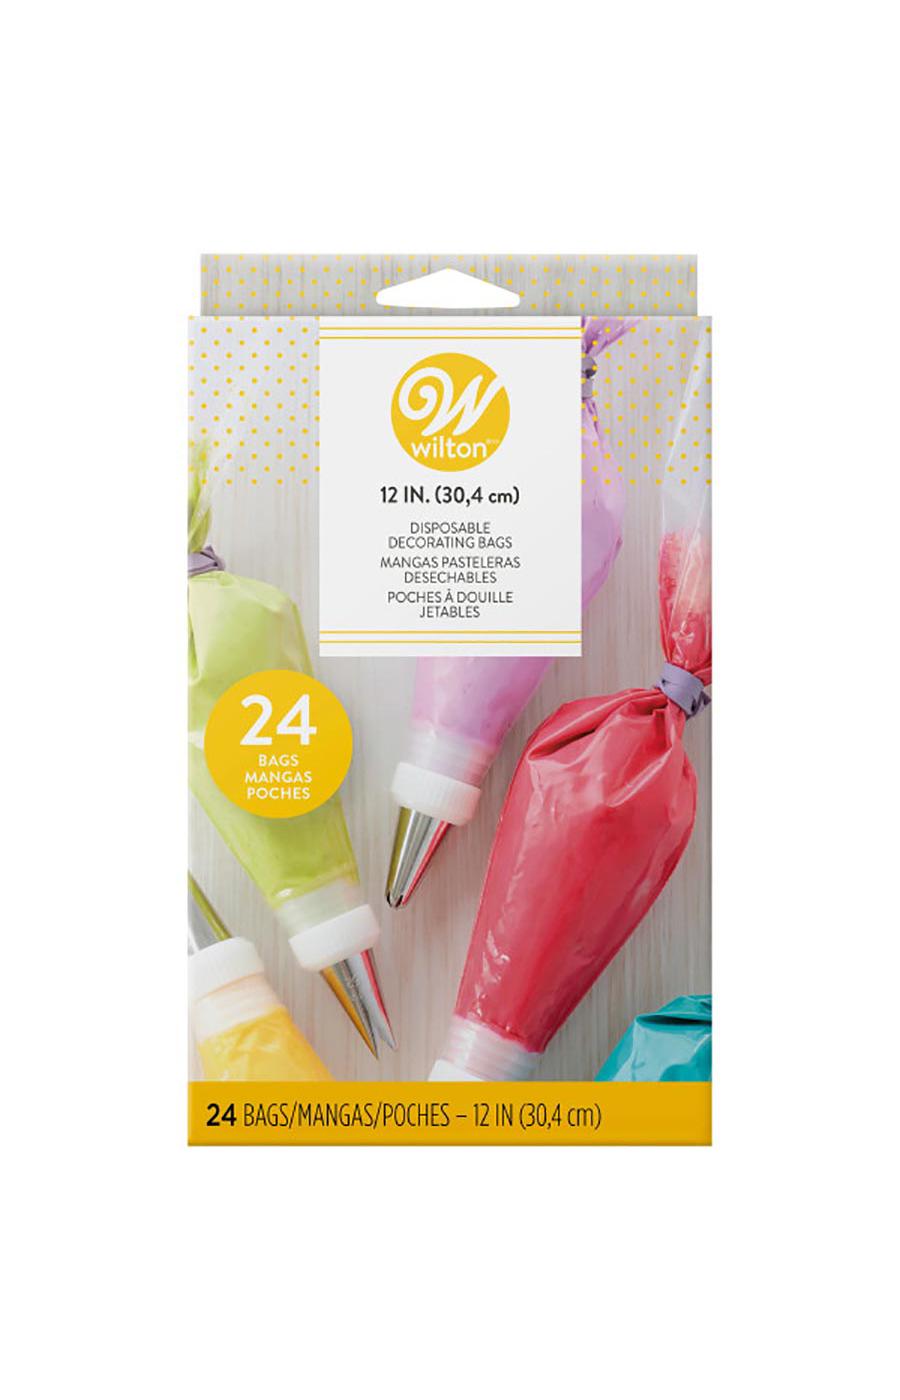 Wilton 12 in Disposable Decorating Bags; image 1 of 2